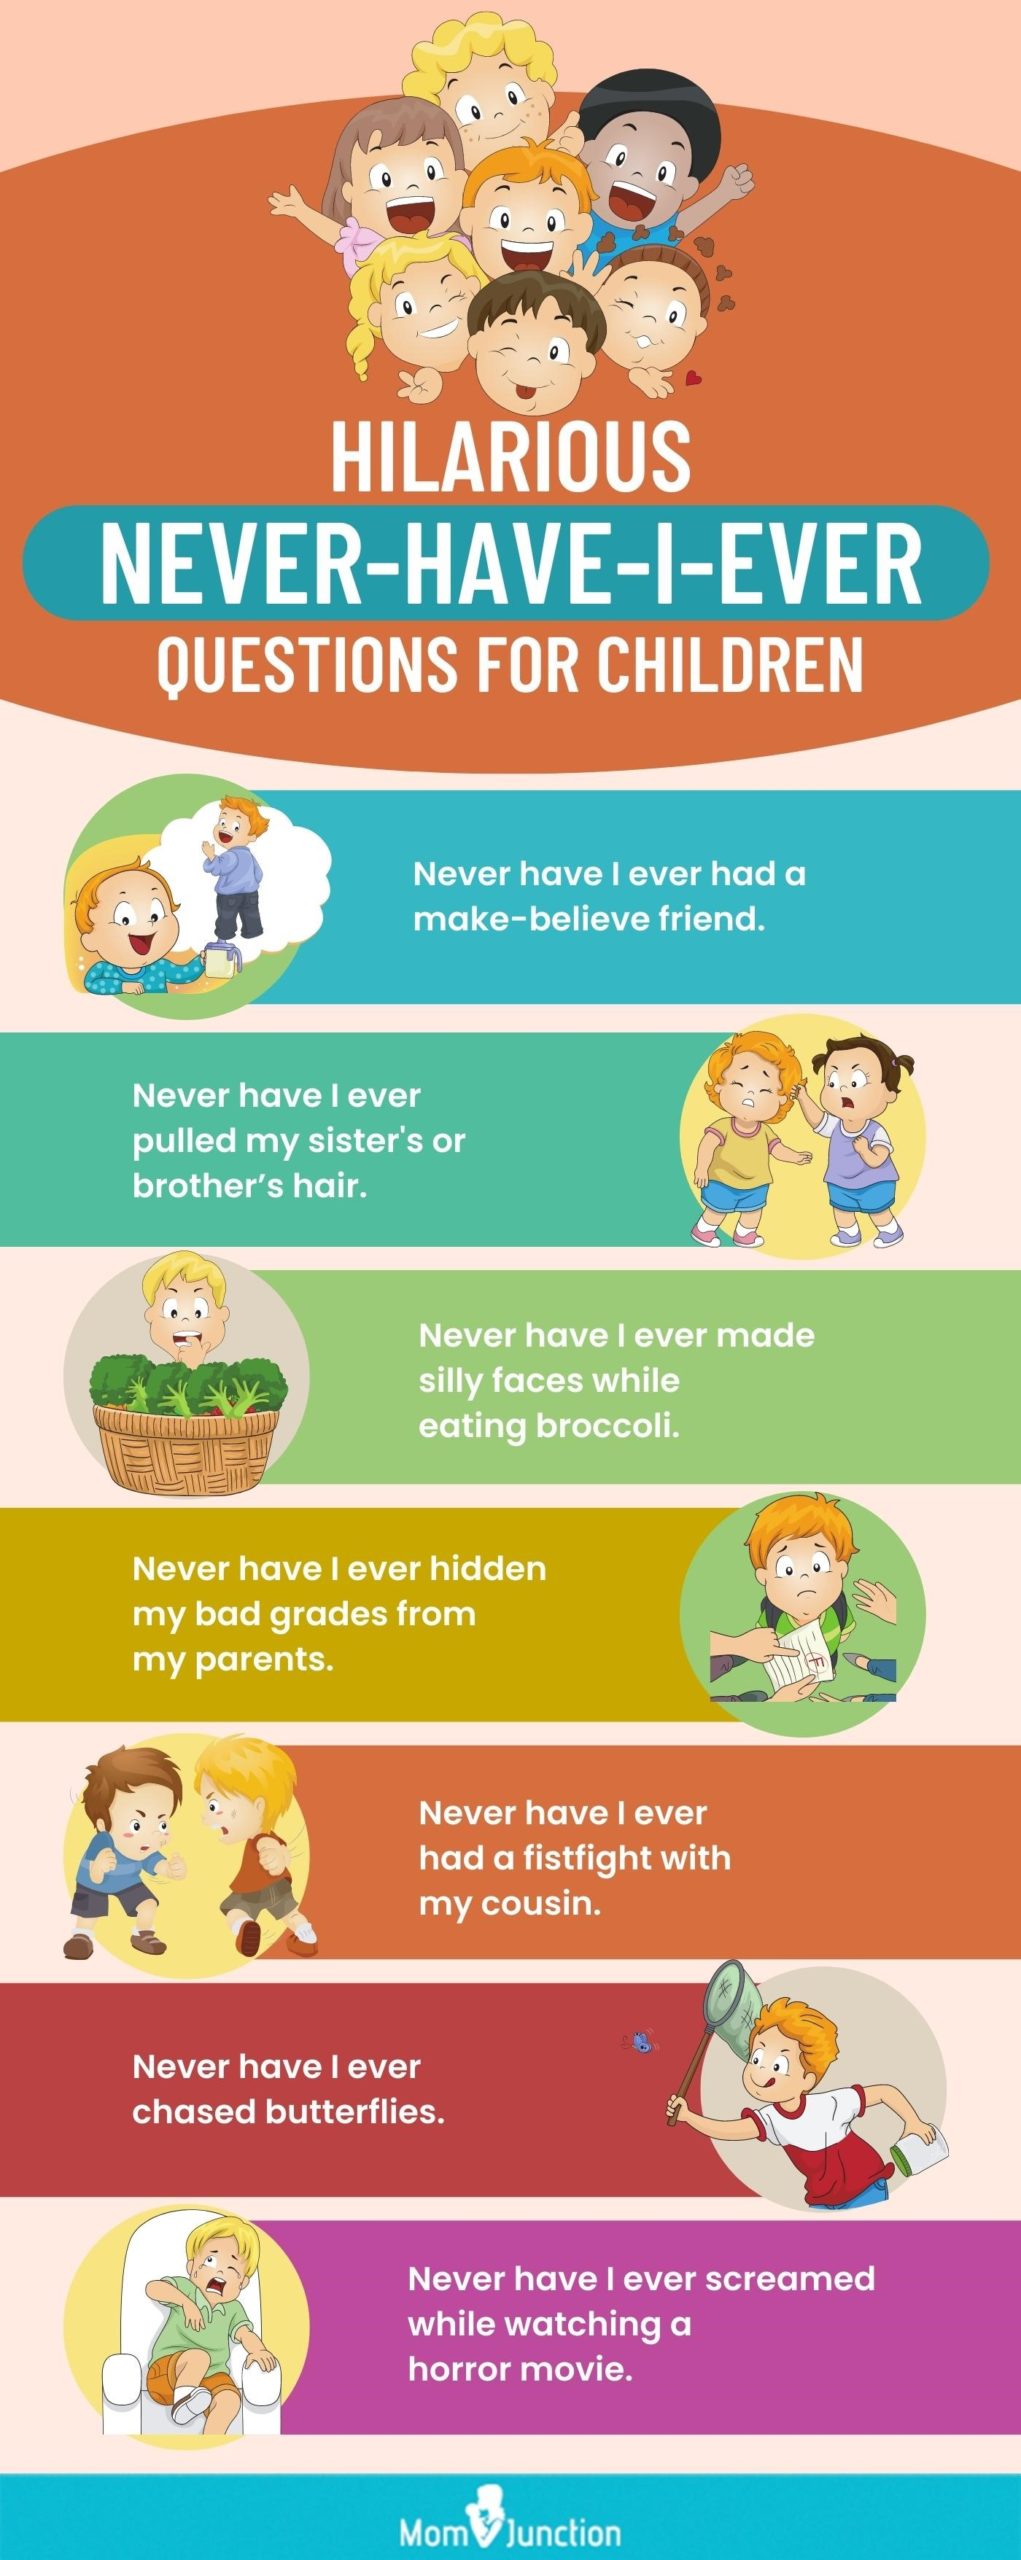 hilarious never have i ever questions for children [infographic]